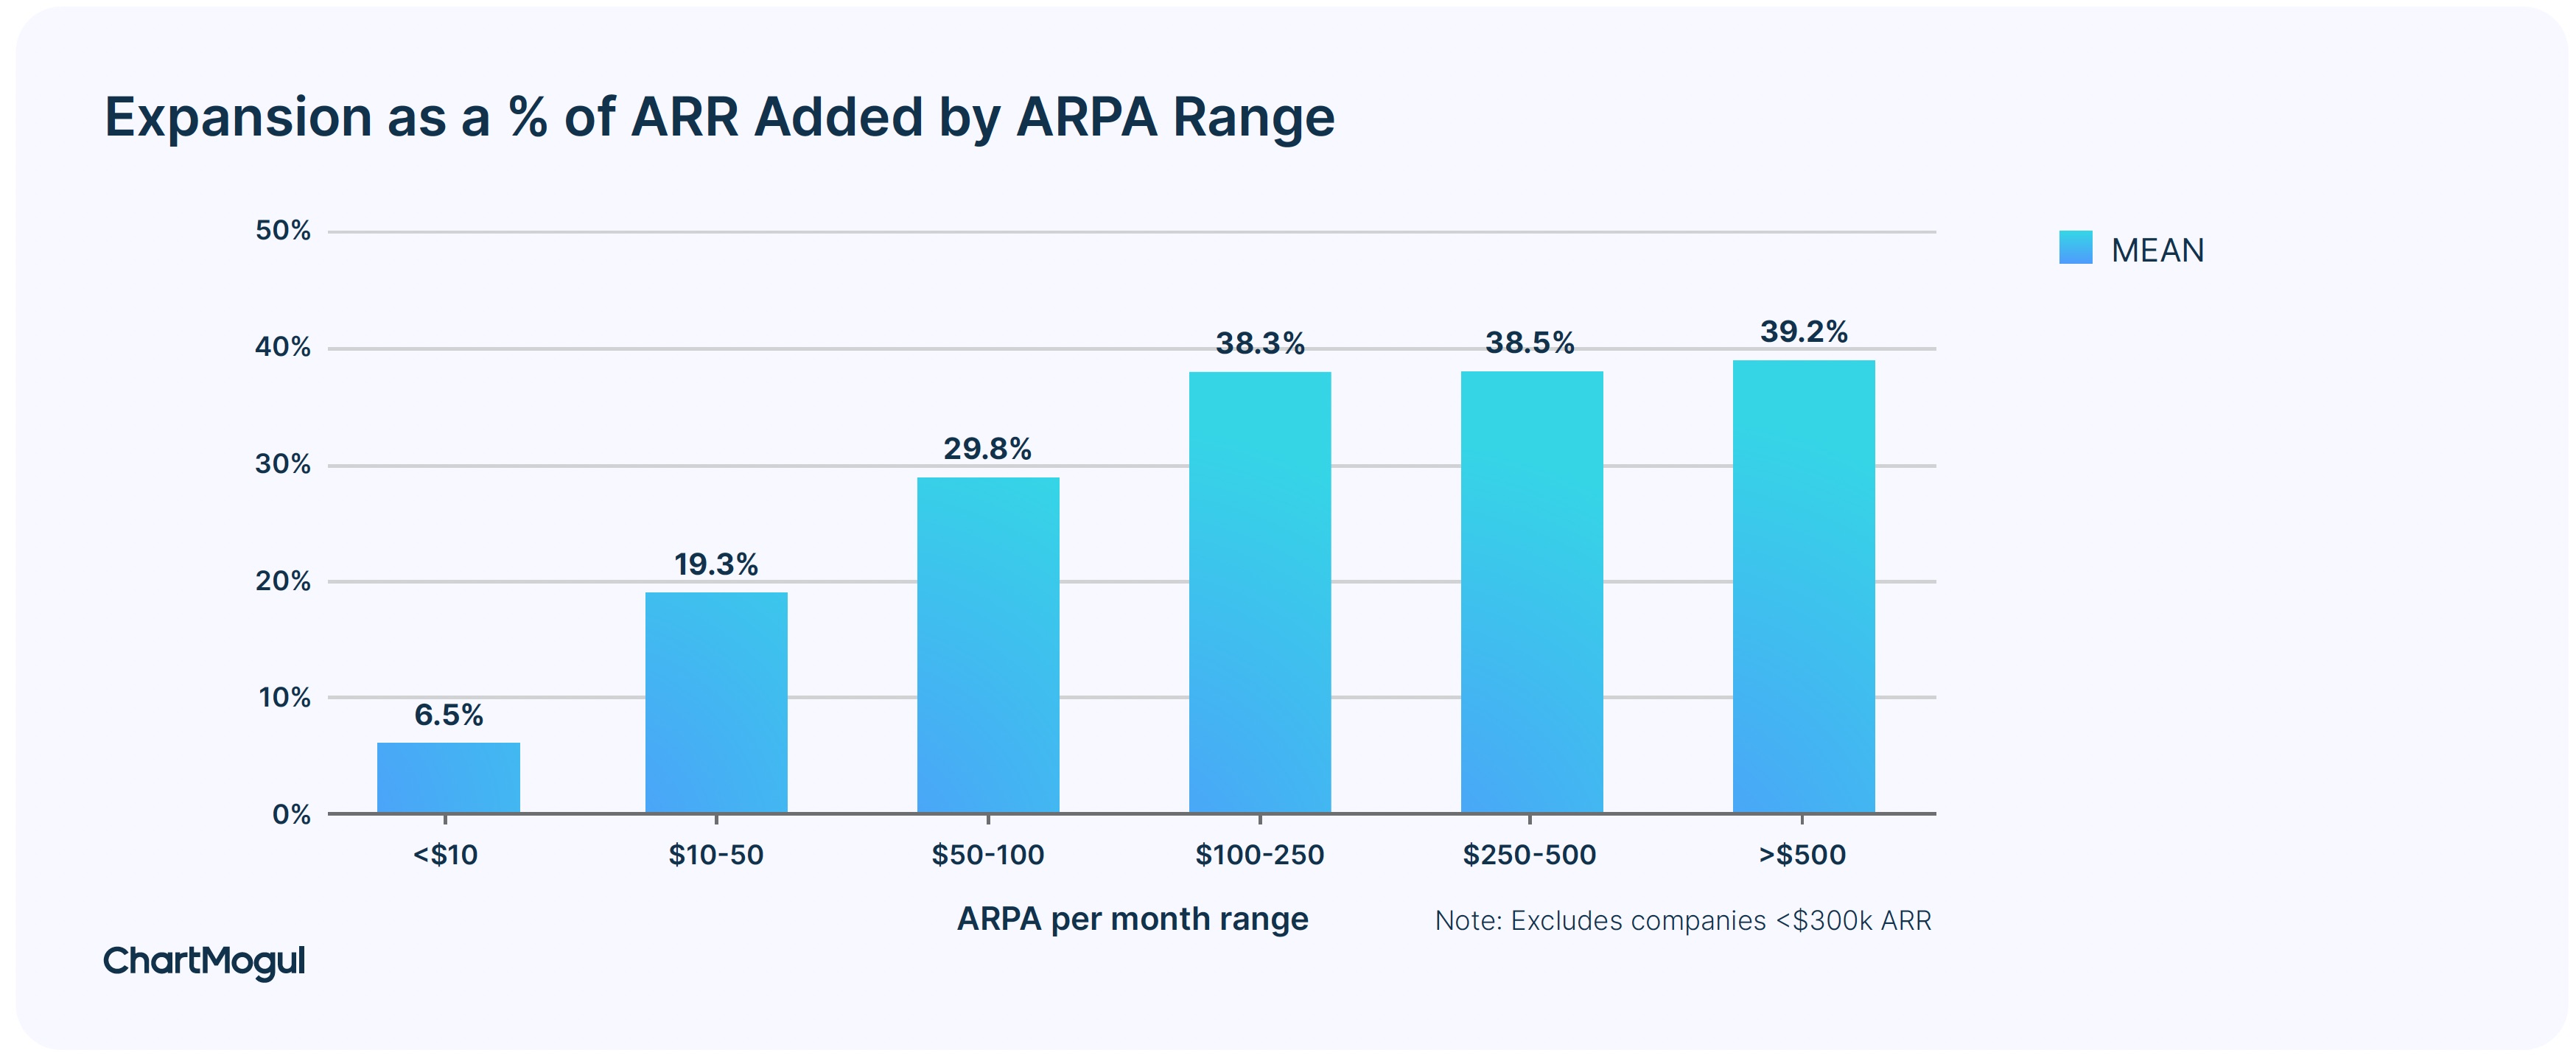 Expansion as a % of ARR added by ARPA range.